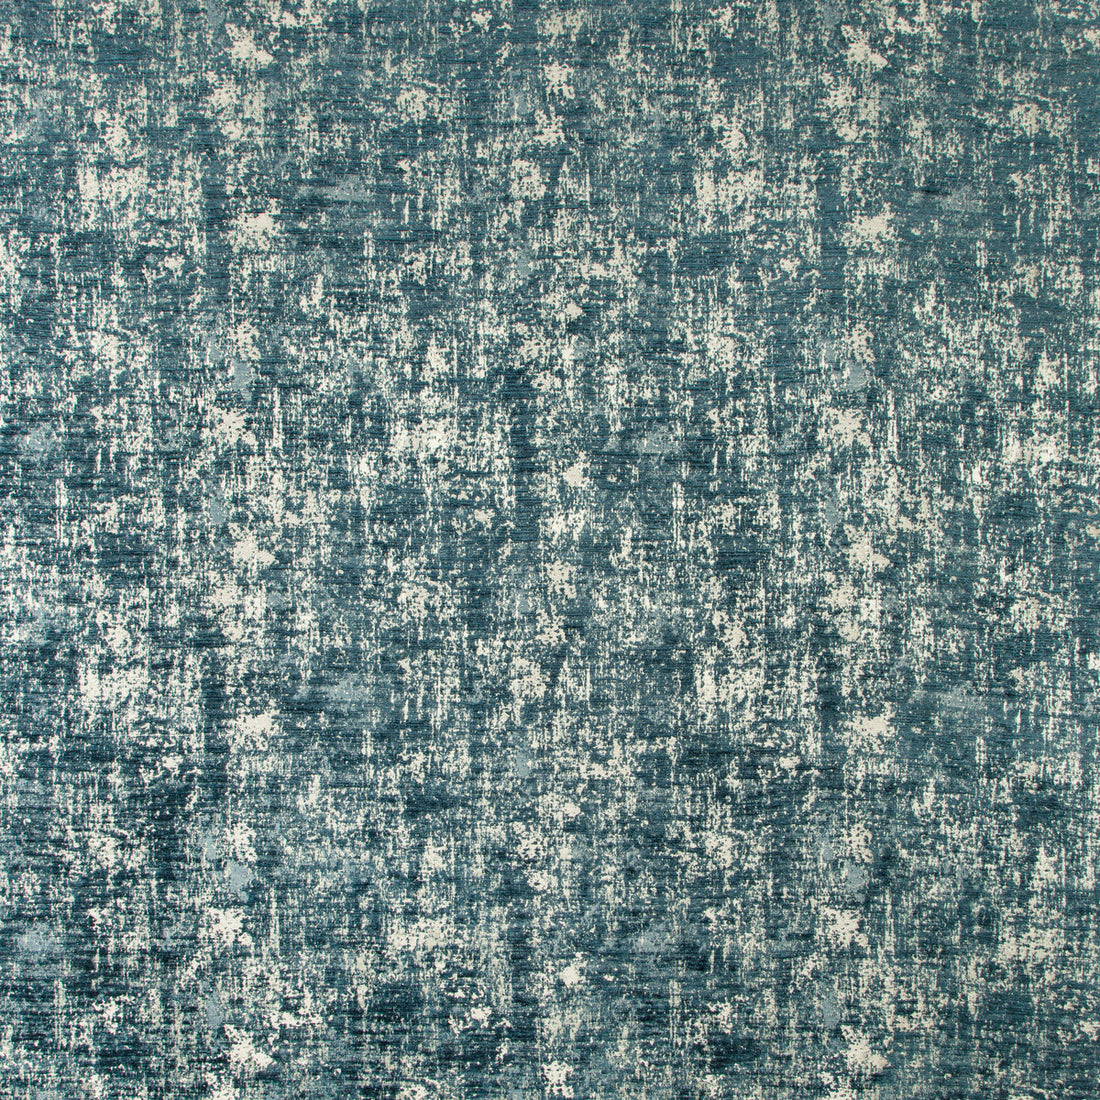 Les Ecorces Woven fabric in teal color - pattern 8017130.35.0 - by Brunschwig &amp; Fils in the Les Ensembliers II collection